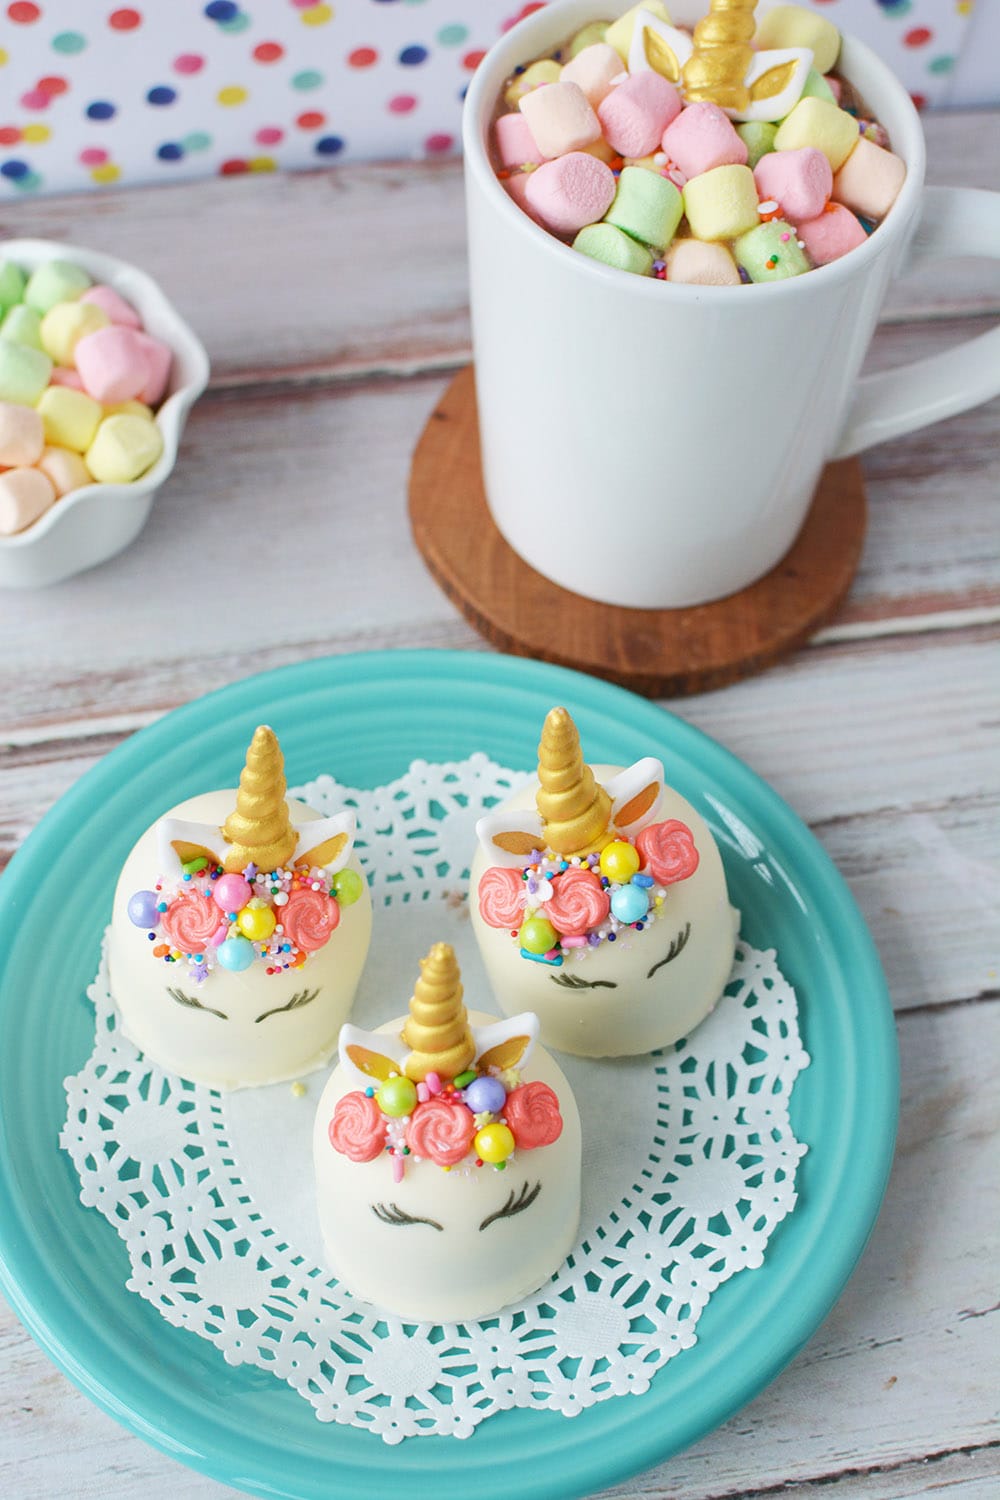 Unicorn hot chocolate bombs on a blue plate buy finished hot chocolate with colored marshmallows.